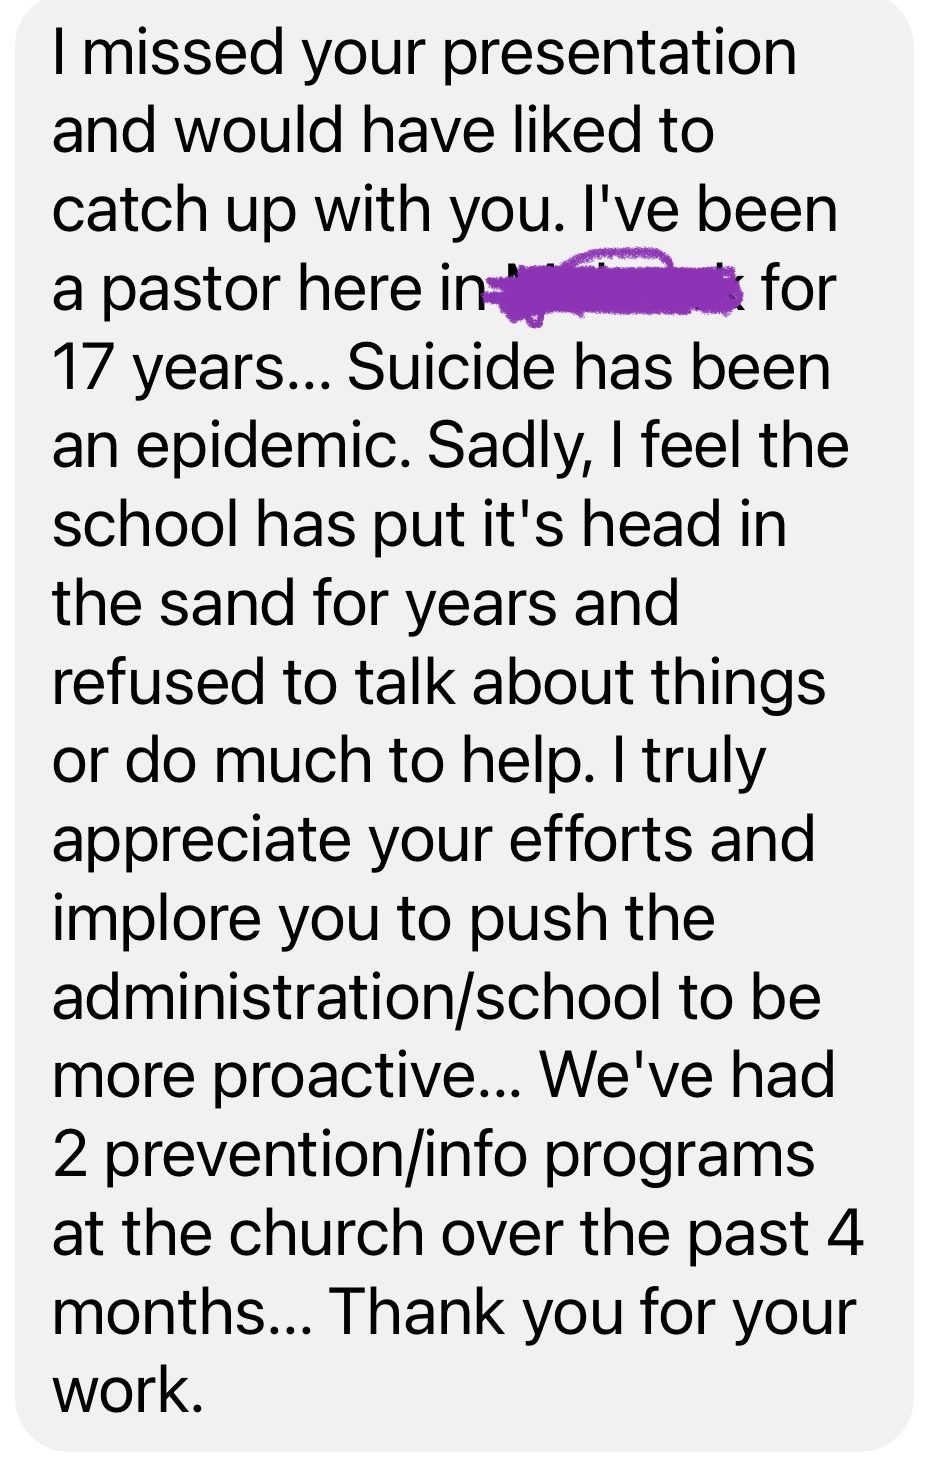 Pastor and the Church expressing their concern for schools and how they handle teen suicide